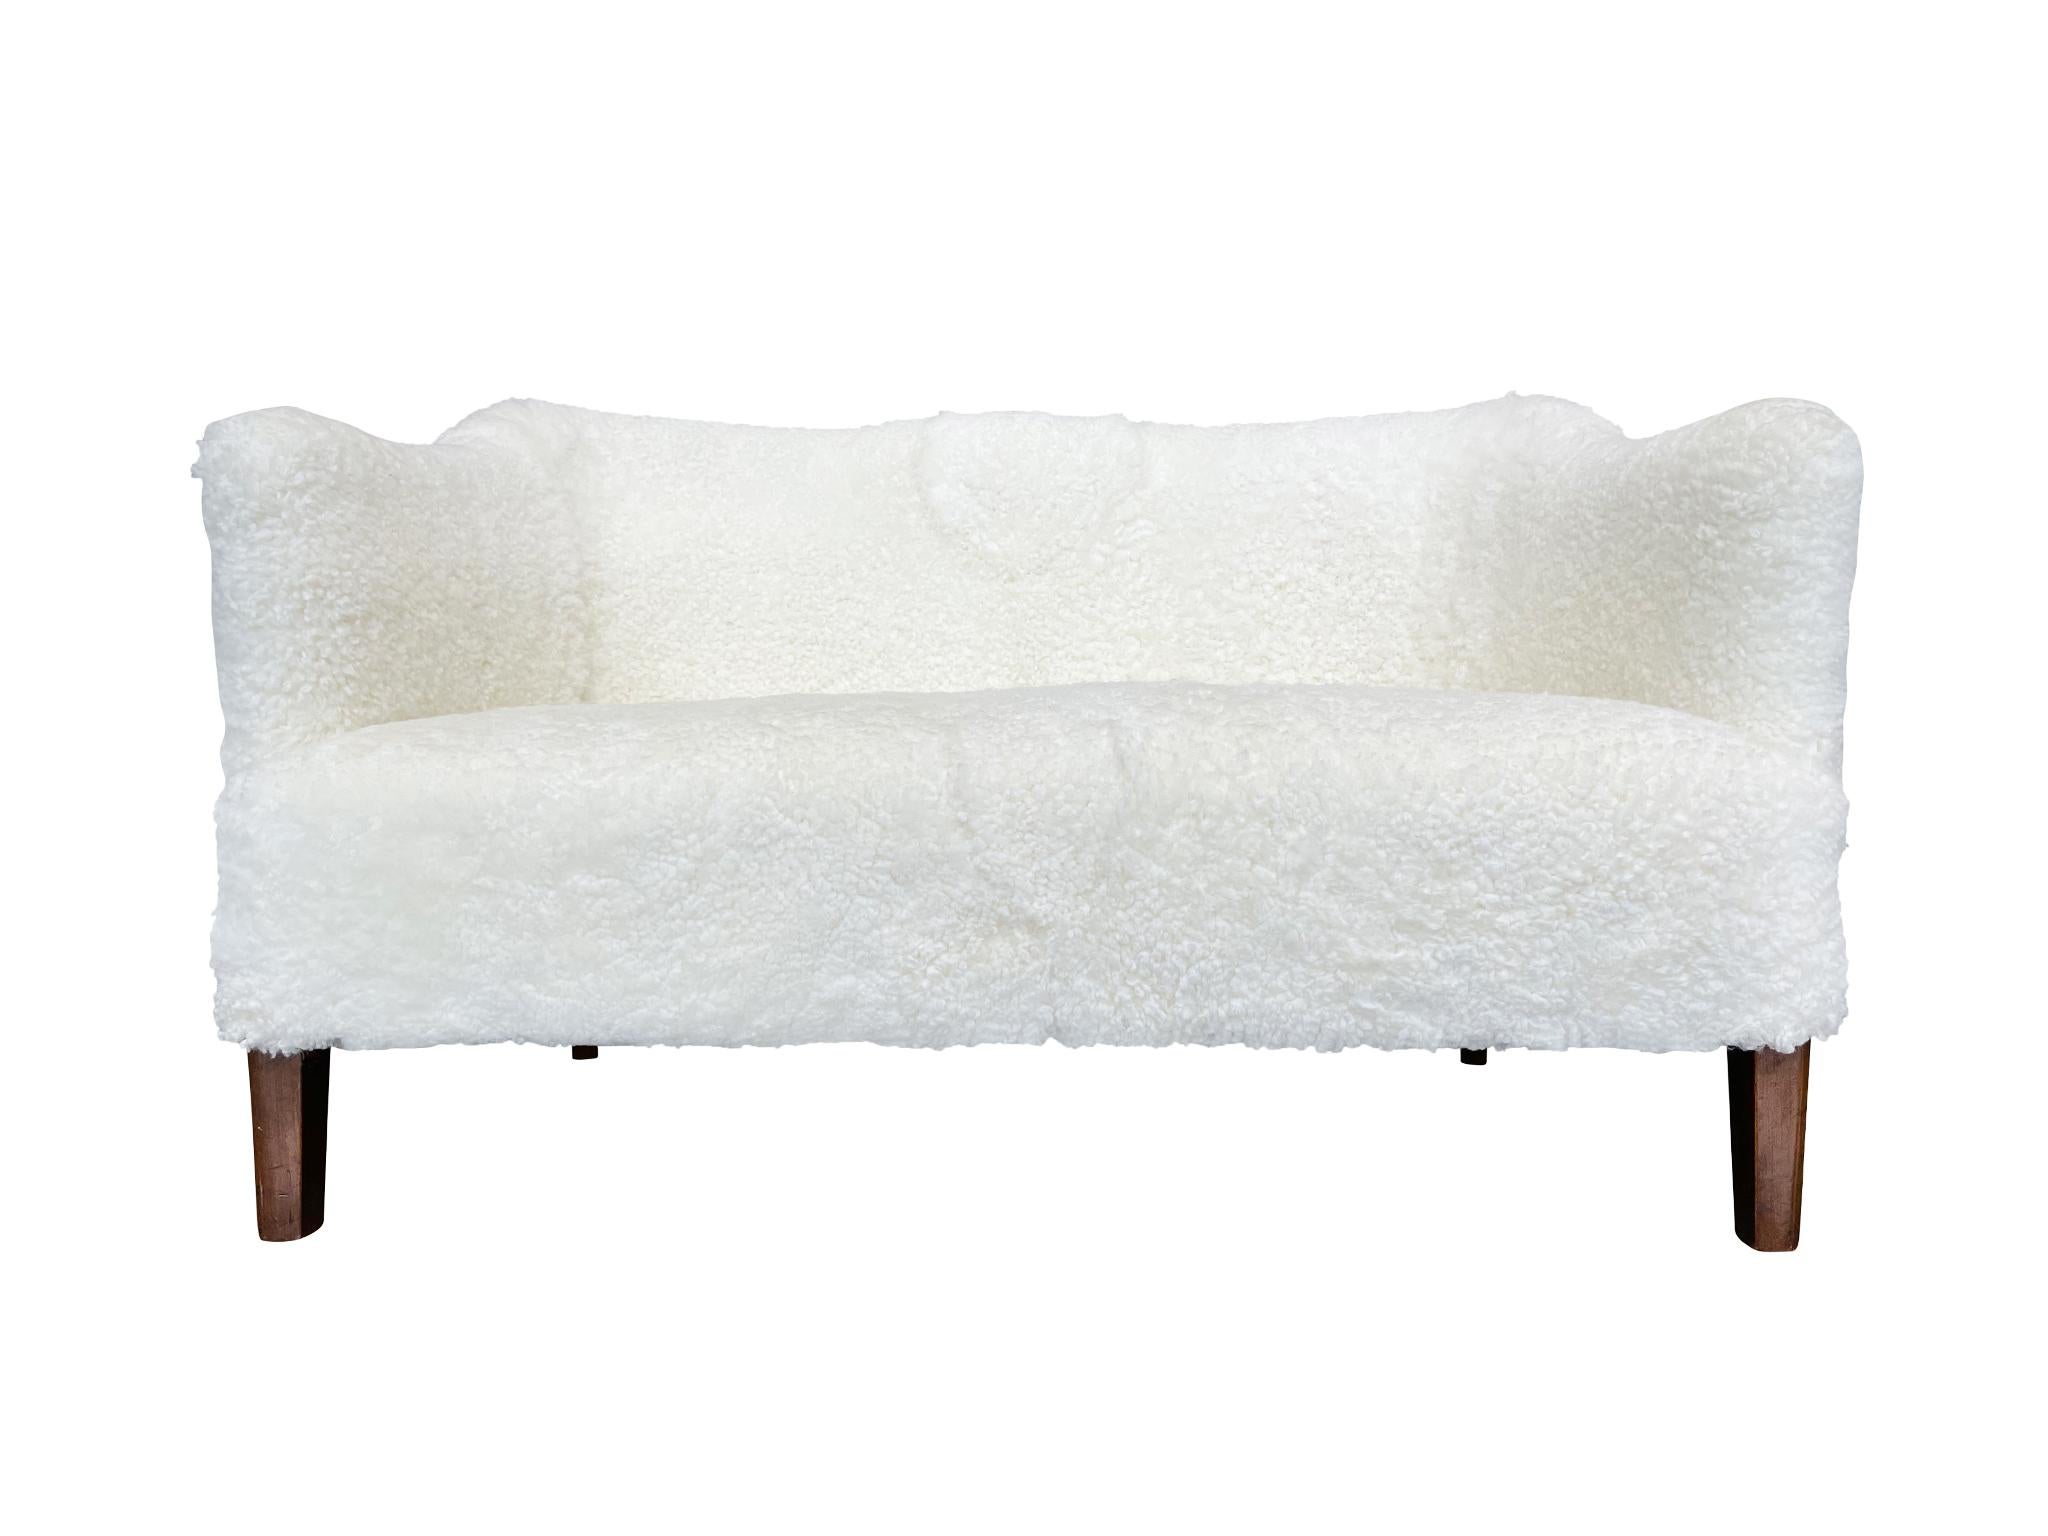 Midcentury Danish settee in the style of Finn Juhl. The settee's design is one of soft curves and rounded edges. The back curves subtly inward at the middle, creating an elegant furrow. Newly reupholstered in a white shearling from Skandilock, this